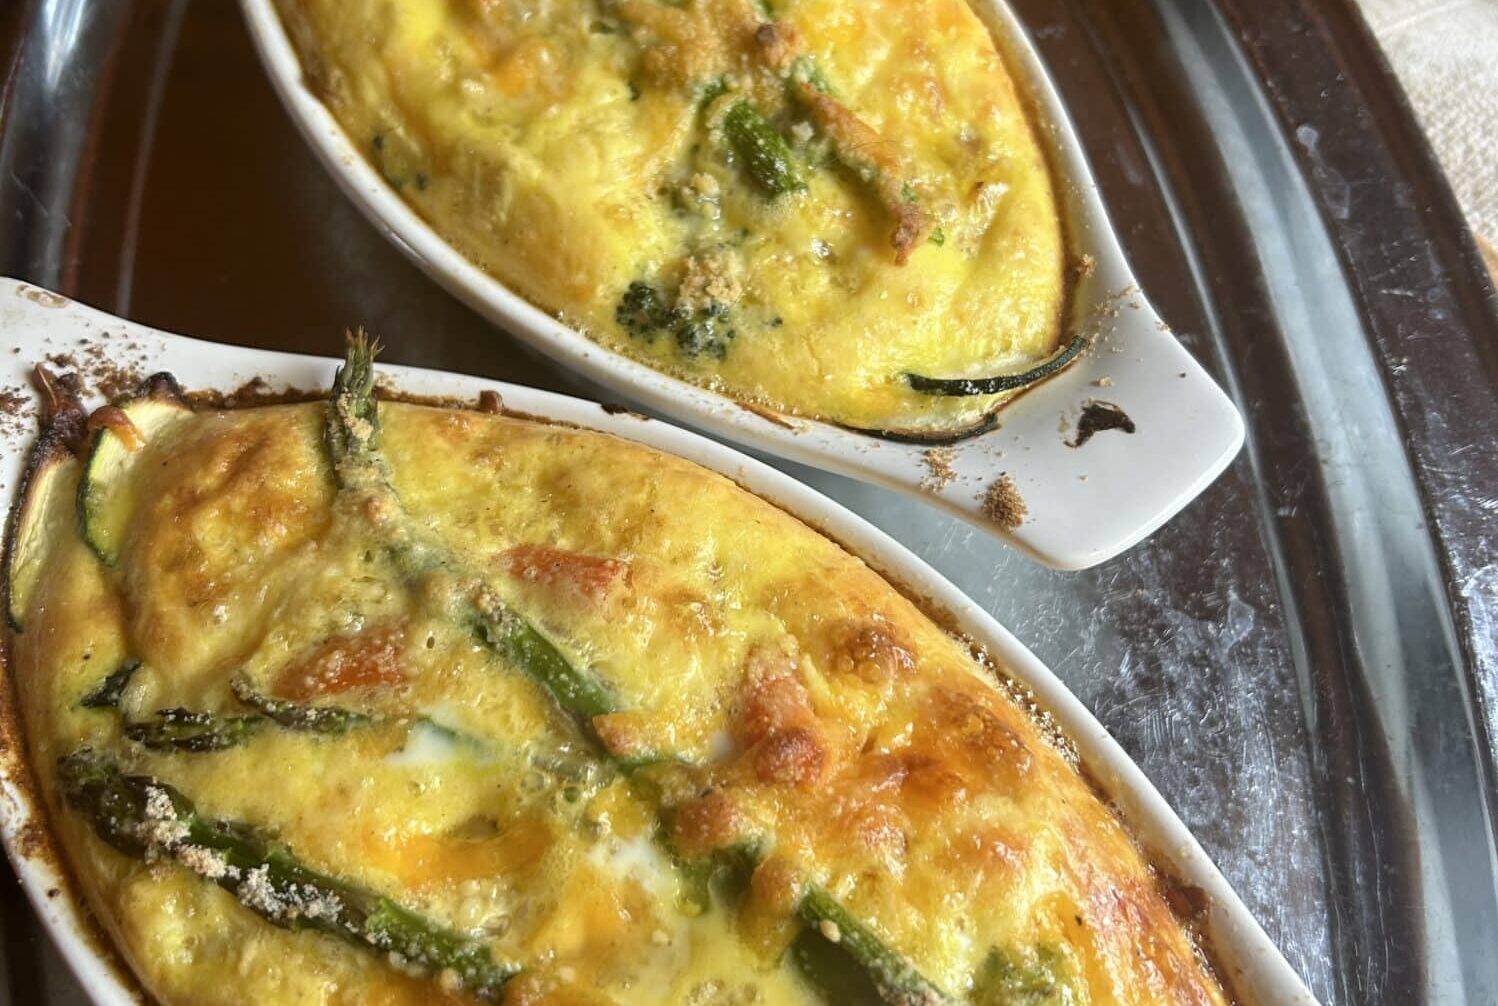 Baked vegetable frittatas fresh out of the oven.